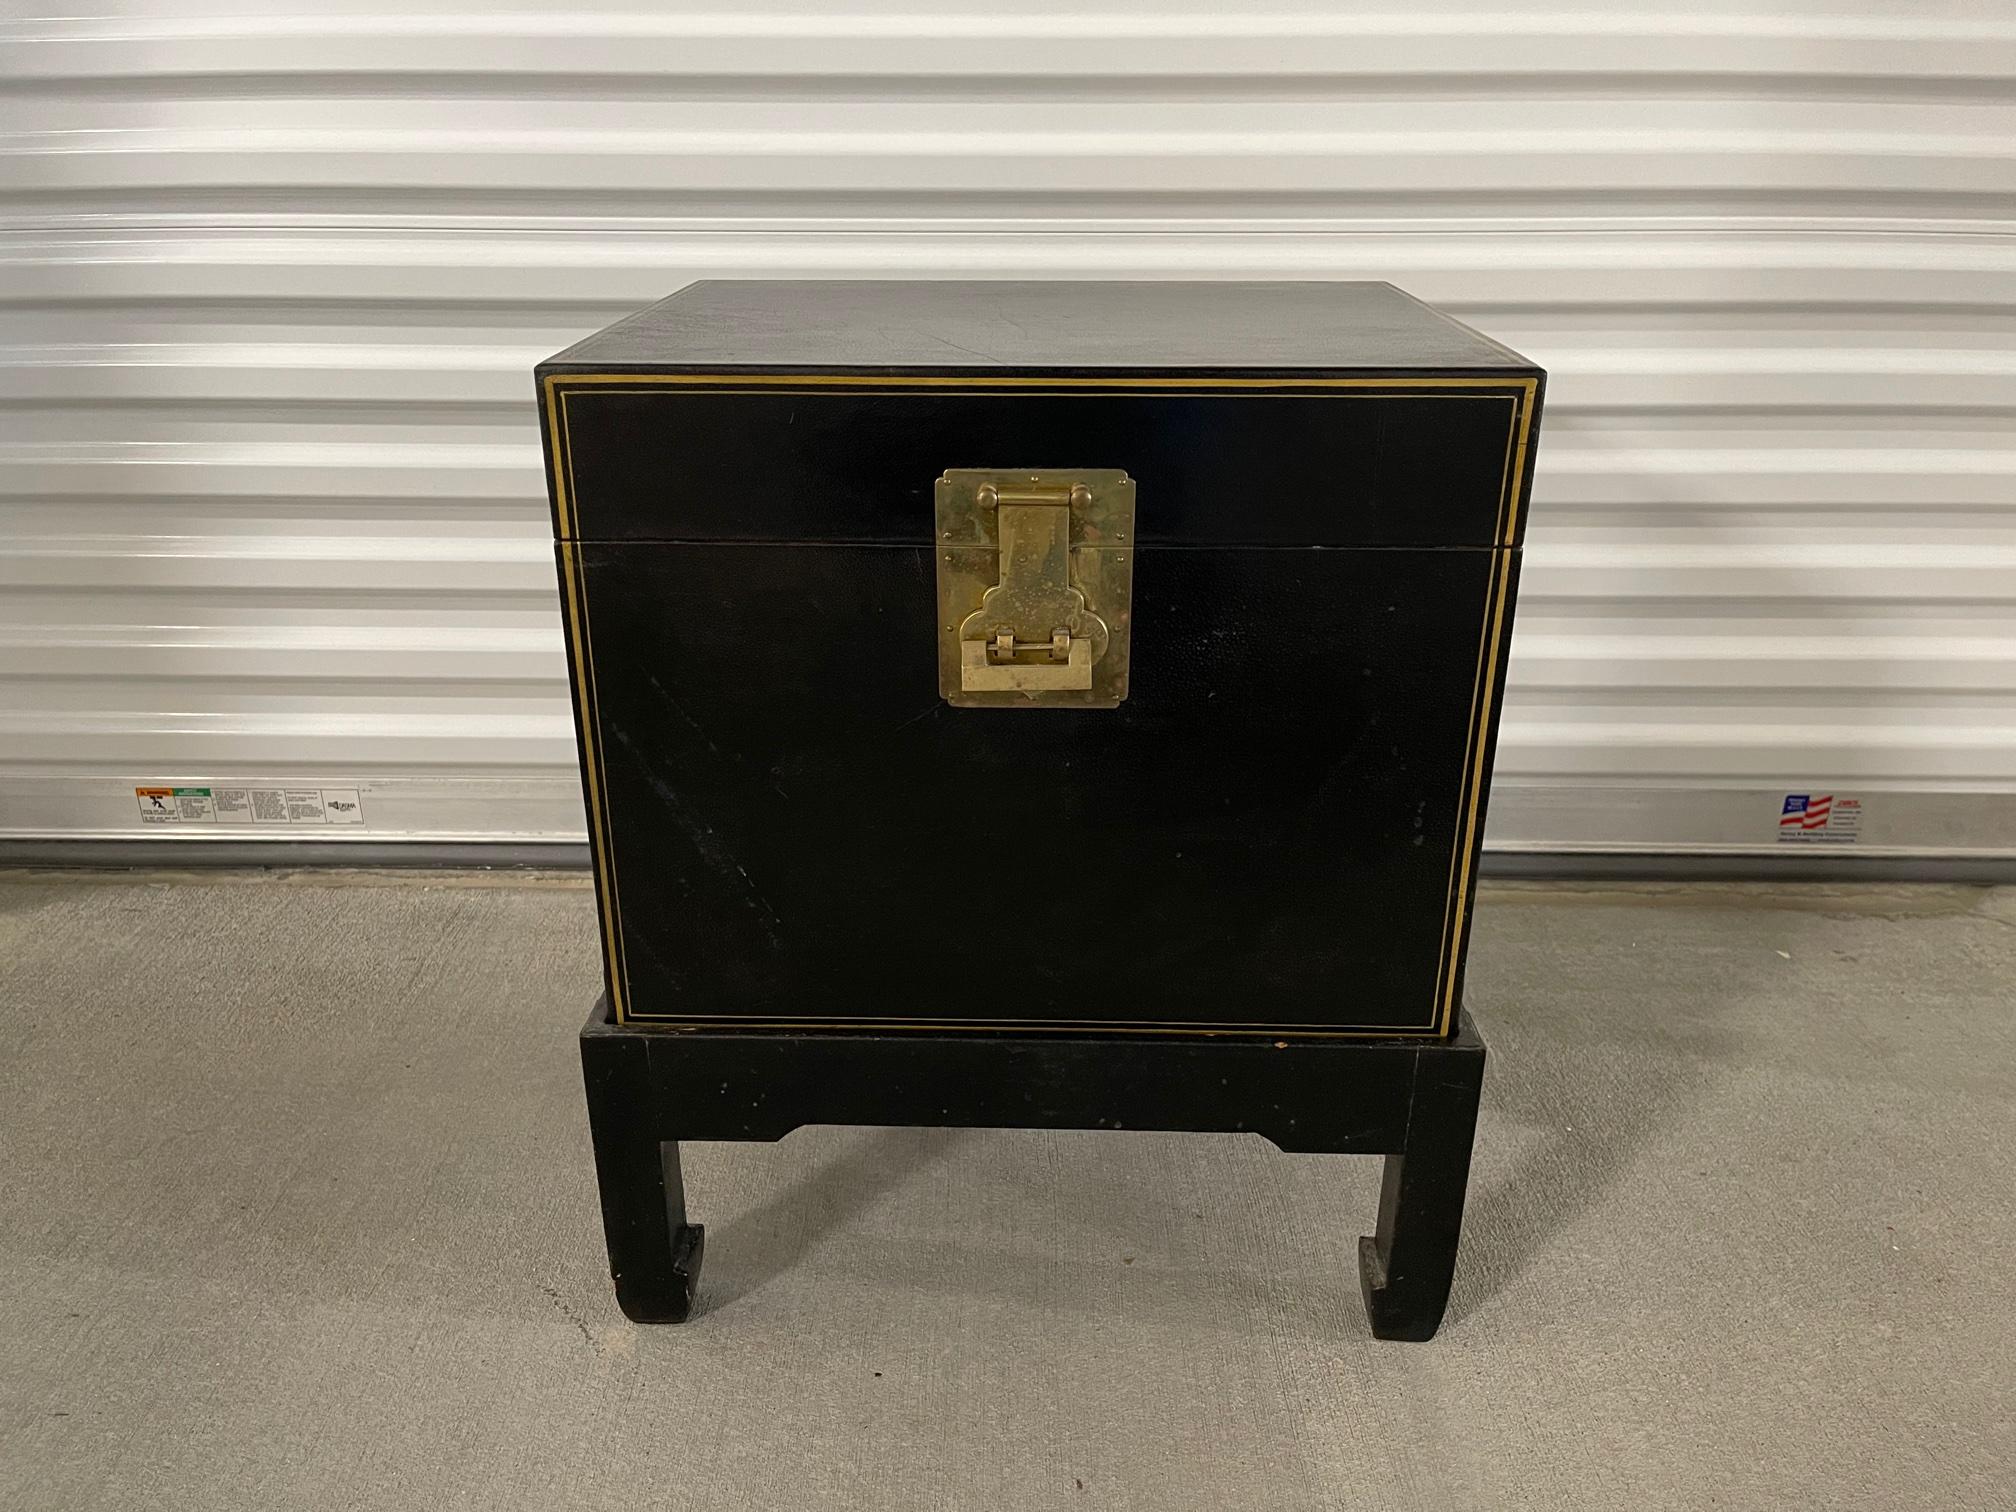 Chinese black leather trunk on stand with brass lock and handles, 20th century.

The height of the stand is 8.25”.